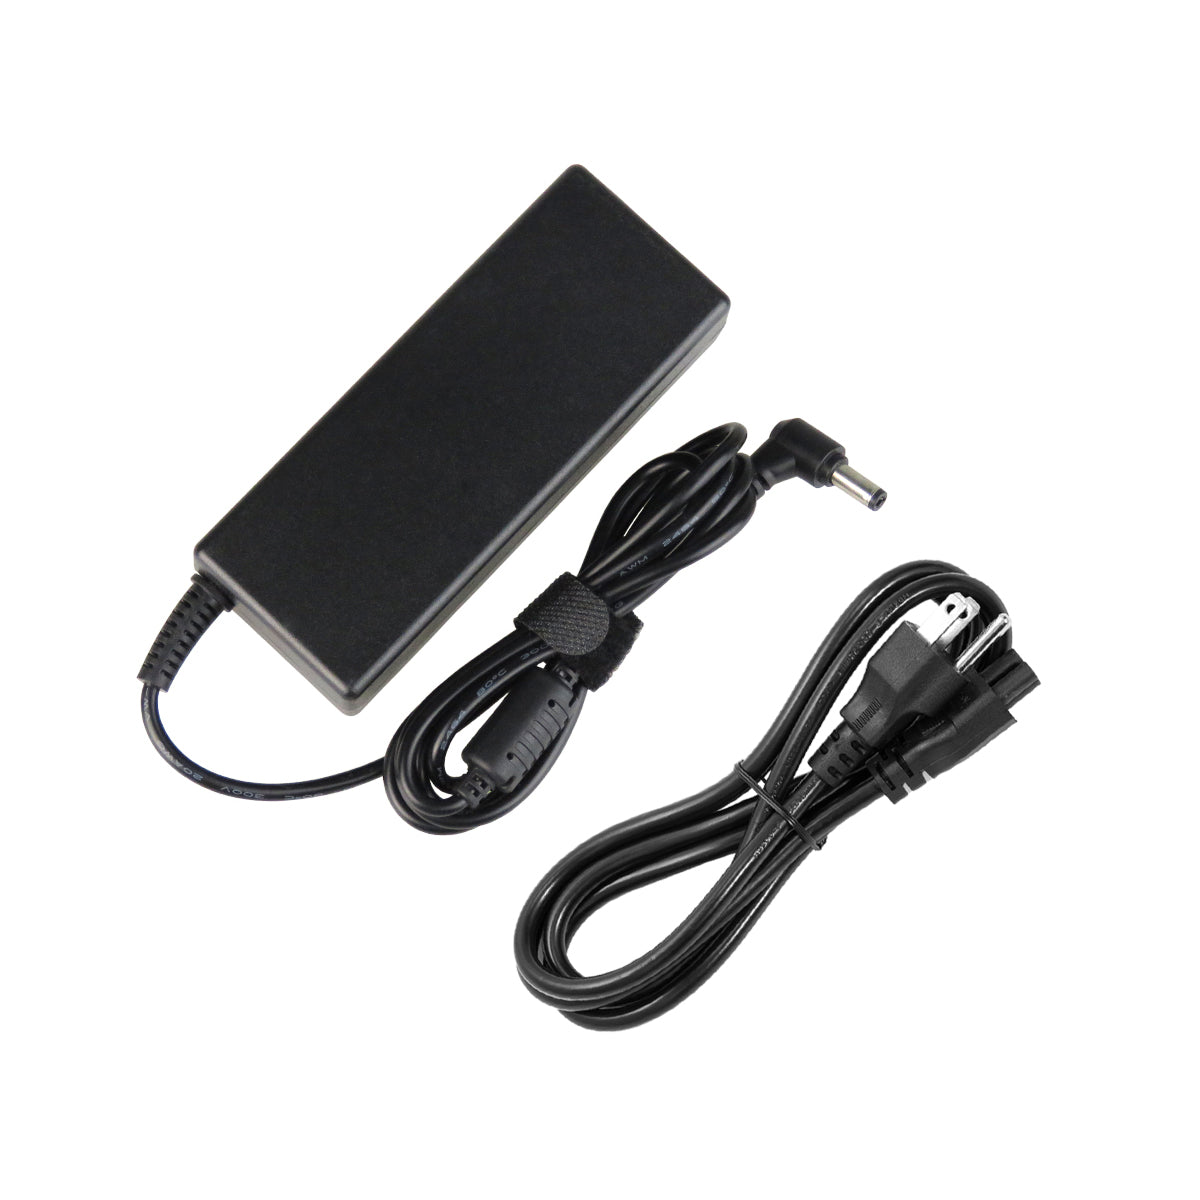 AC Adapter Charger for ASUS X55A-JH91 Laptop.